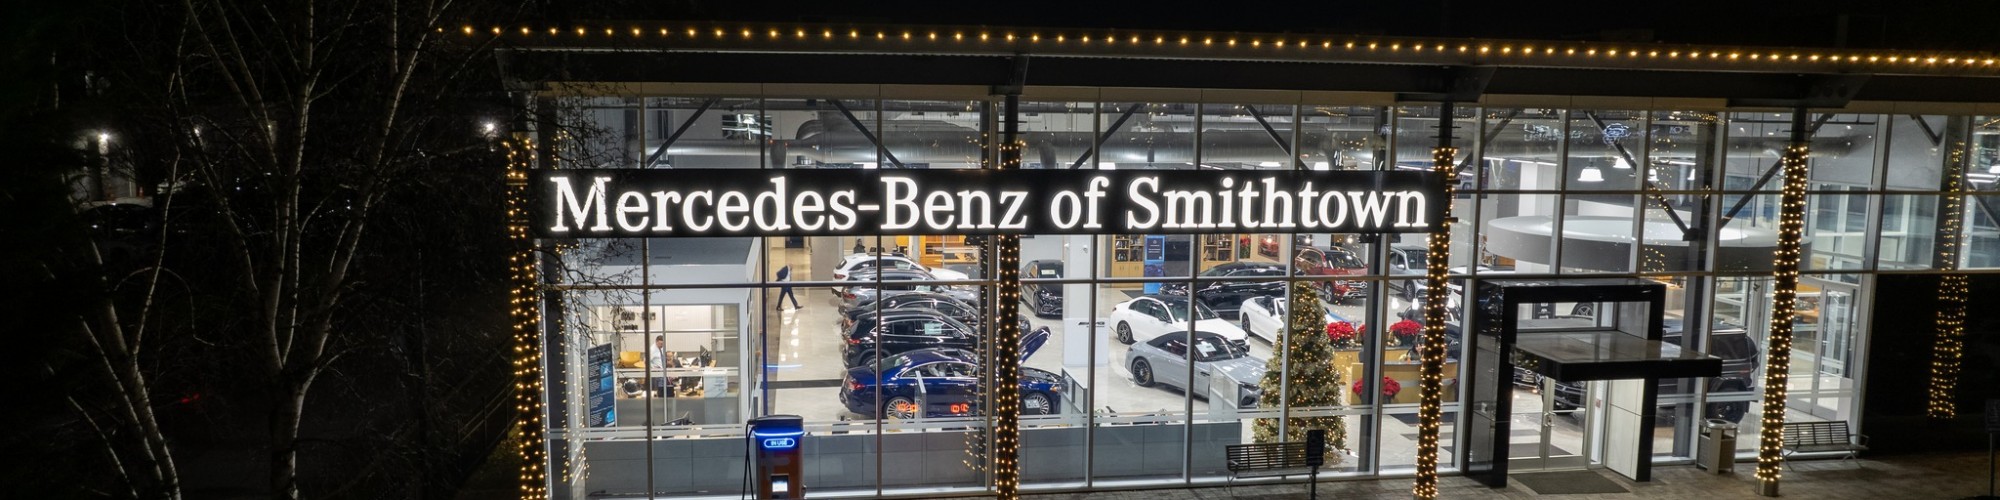 Mercedes-Benz of Smithtown cover image